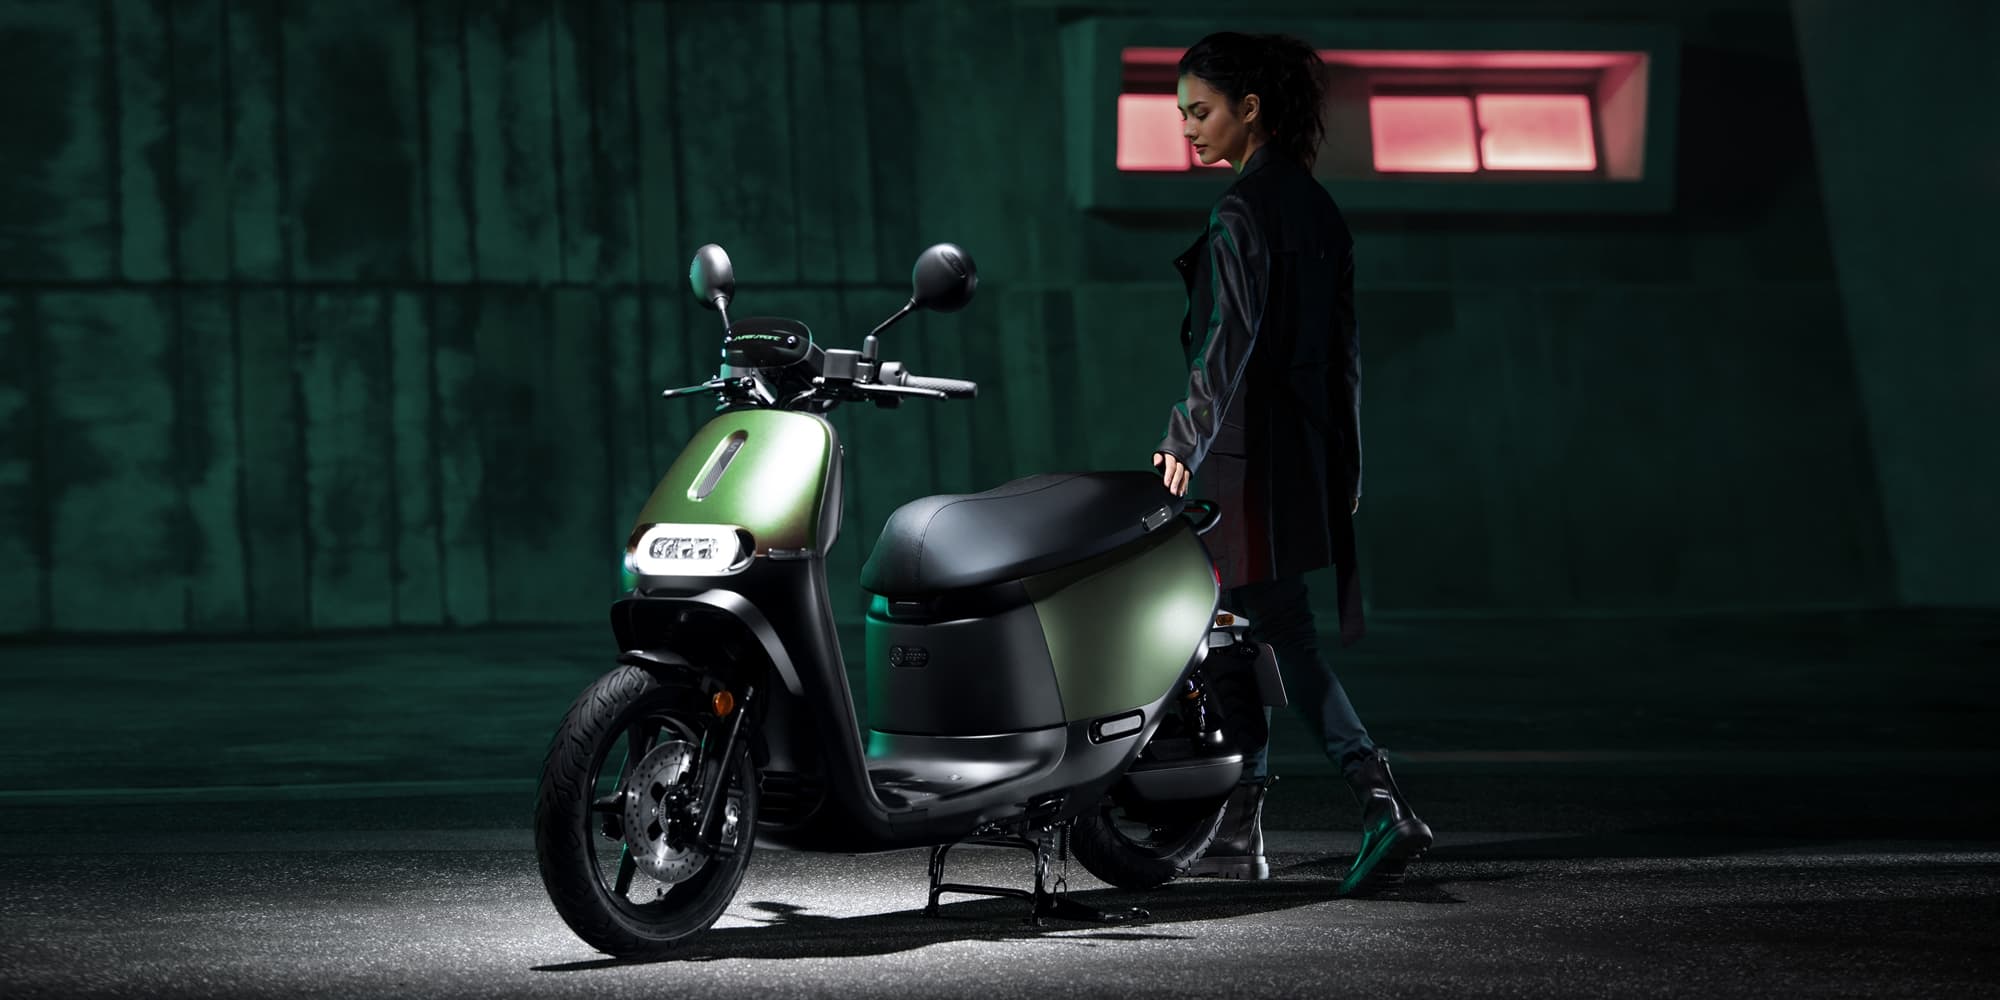 slap af Knogle Vejhus Gogoro unveils new SSmartcore platform, helping other companies build  better electric scooters and e-motorcycles | Electrek